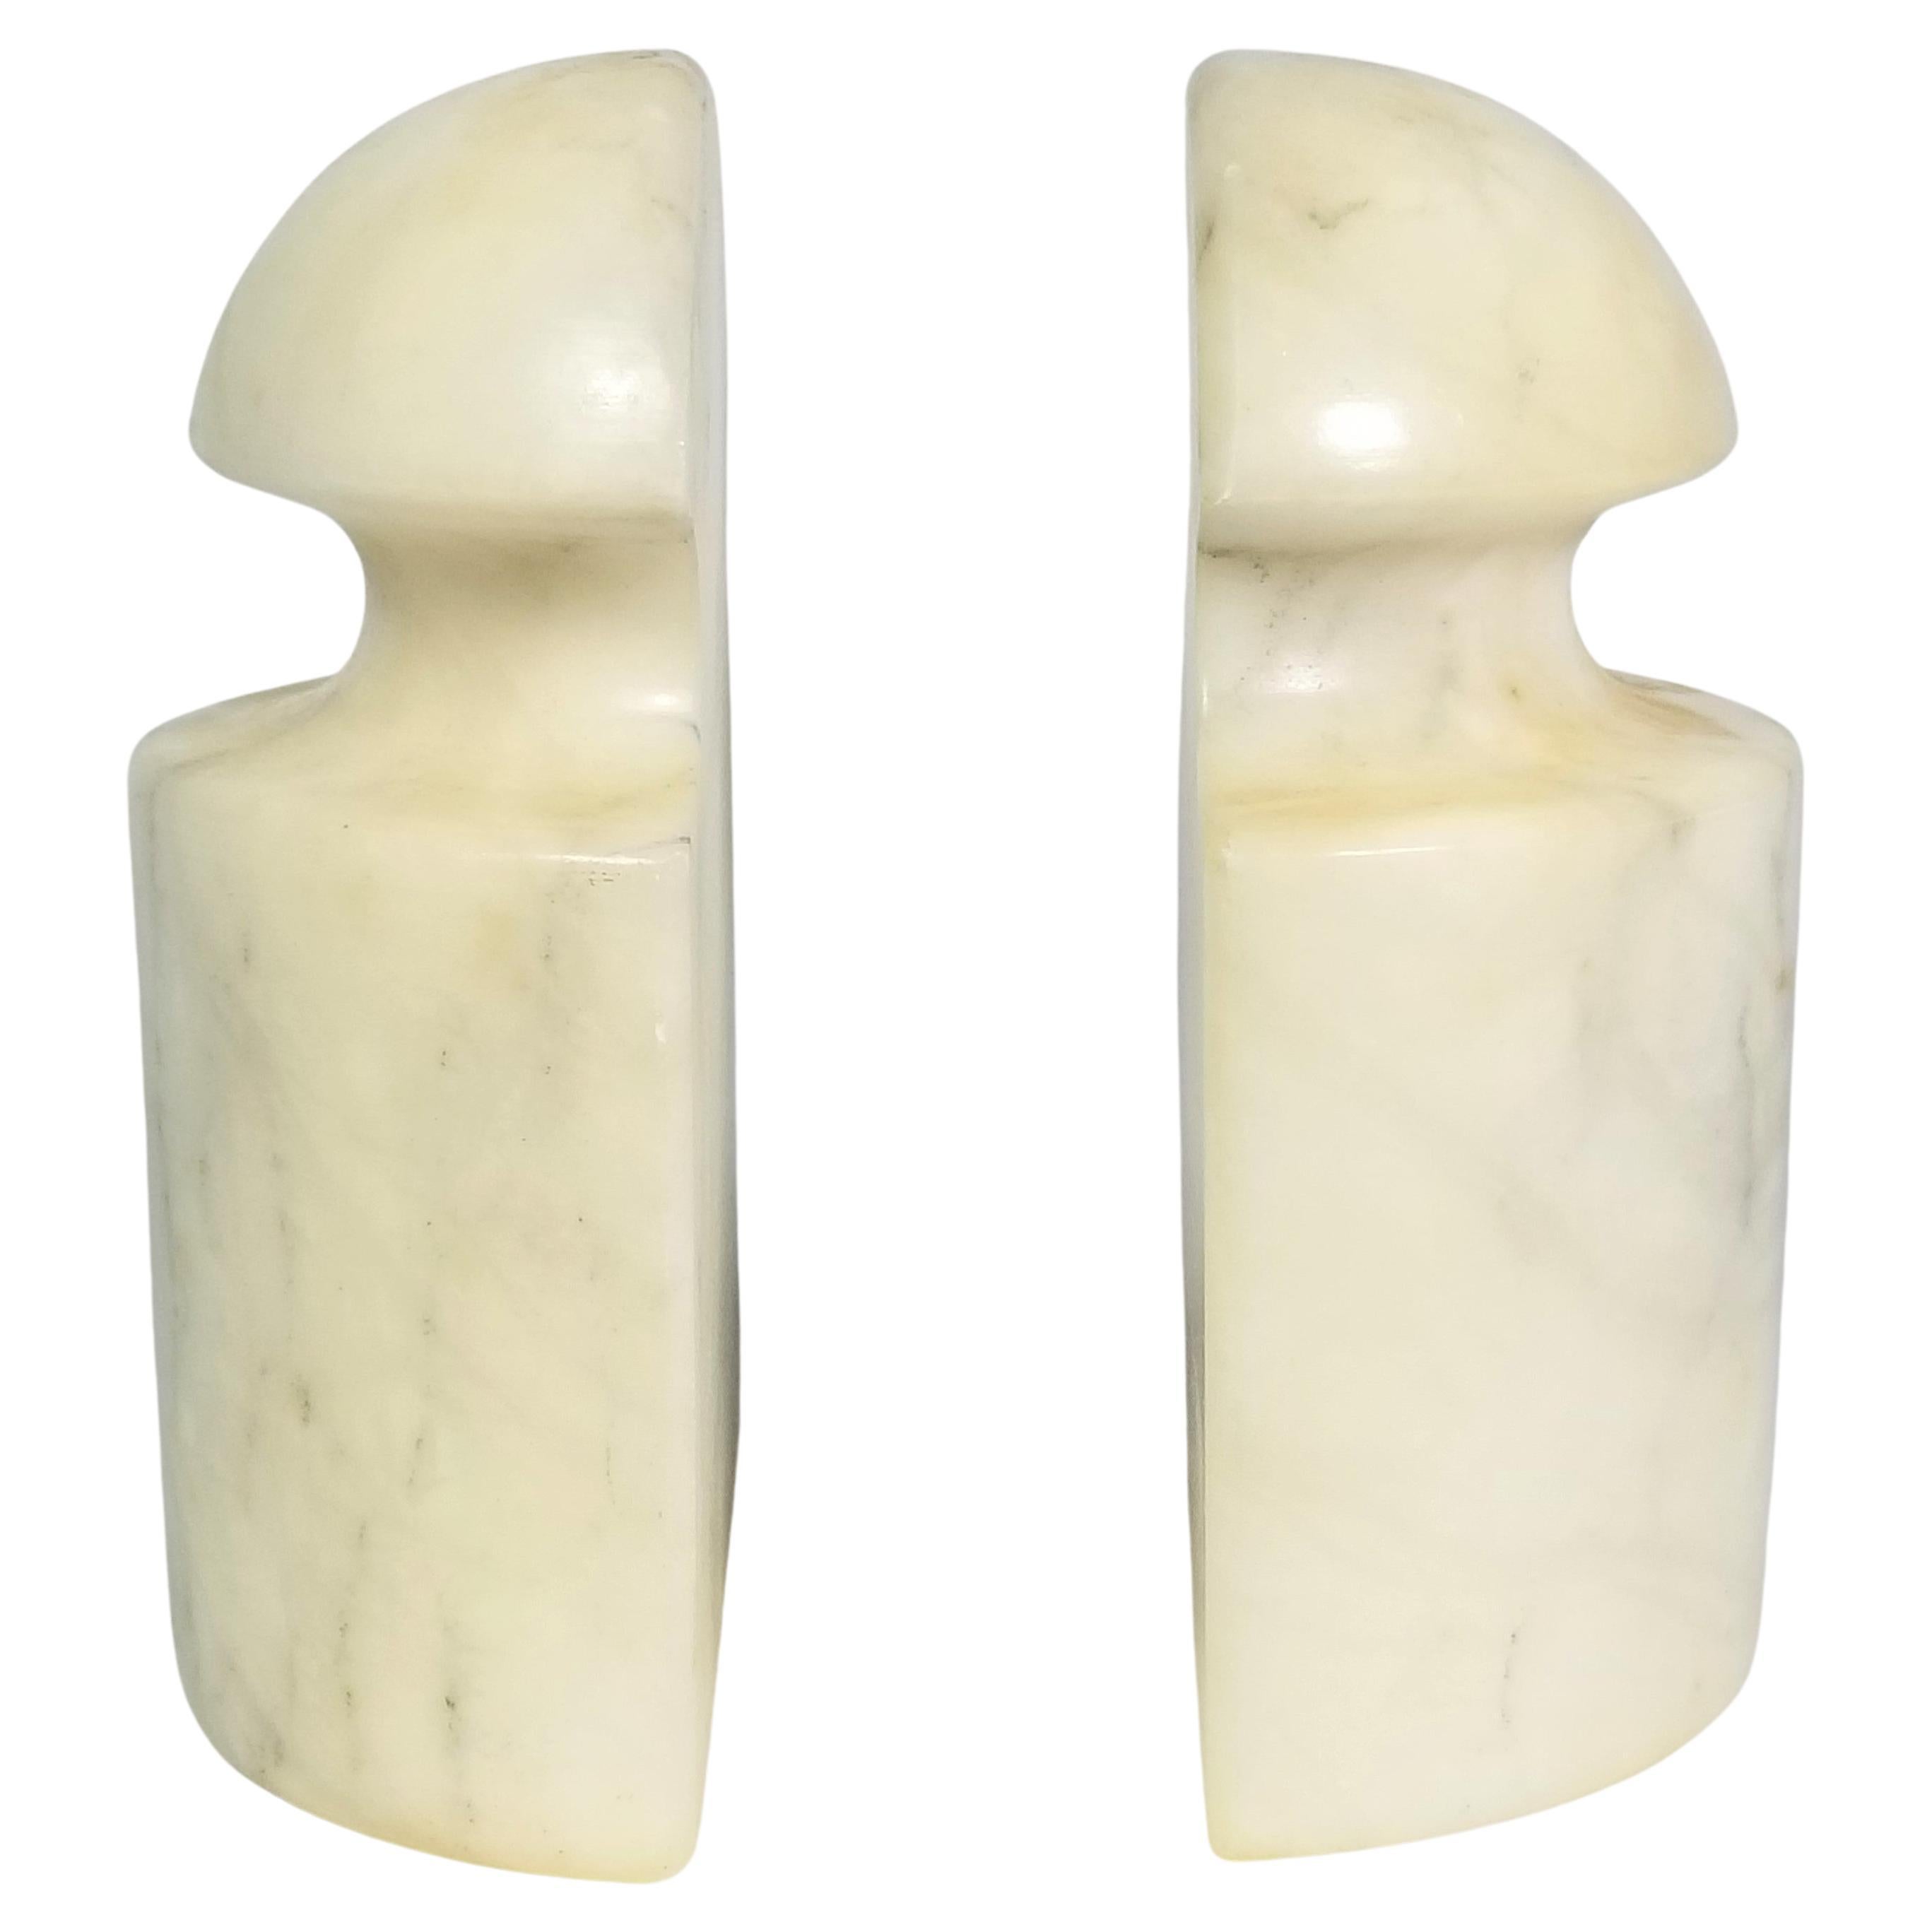 Italian Alabaster Bookends Made in Italy, Mid-Century 